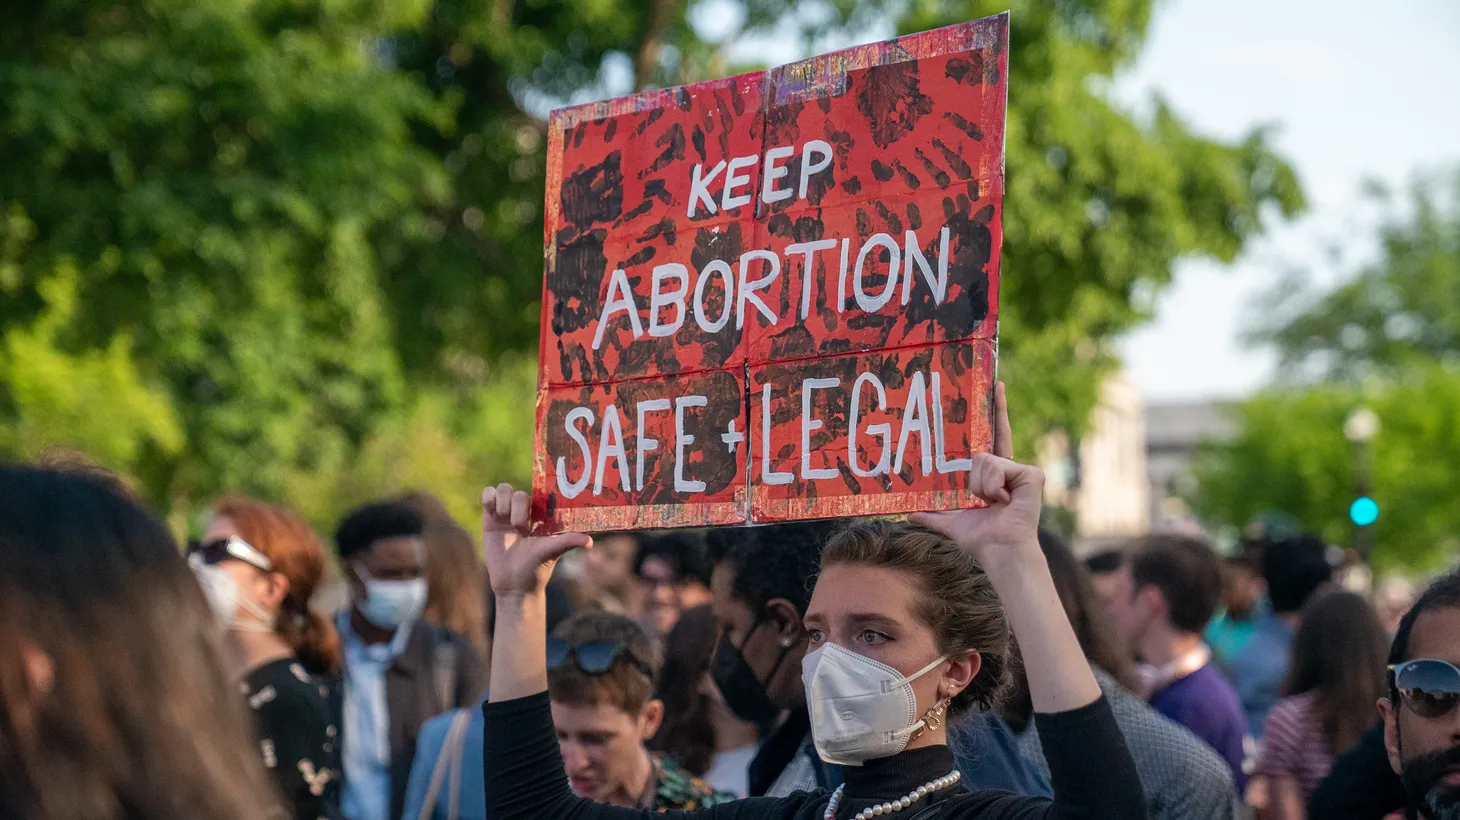 An activist holds a sign that says, “Keep abortion safe and legal.”